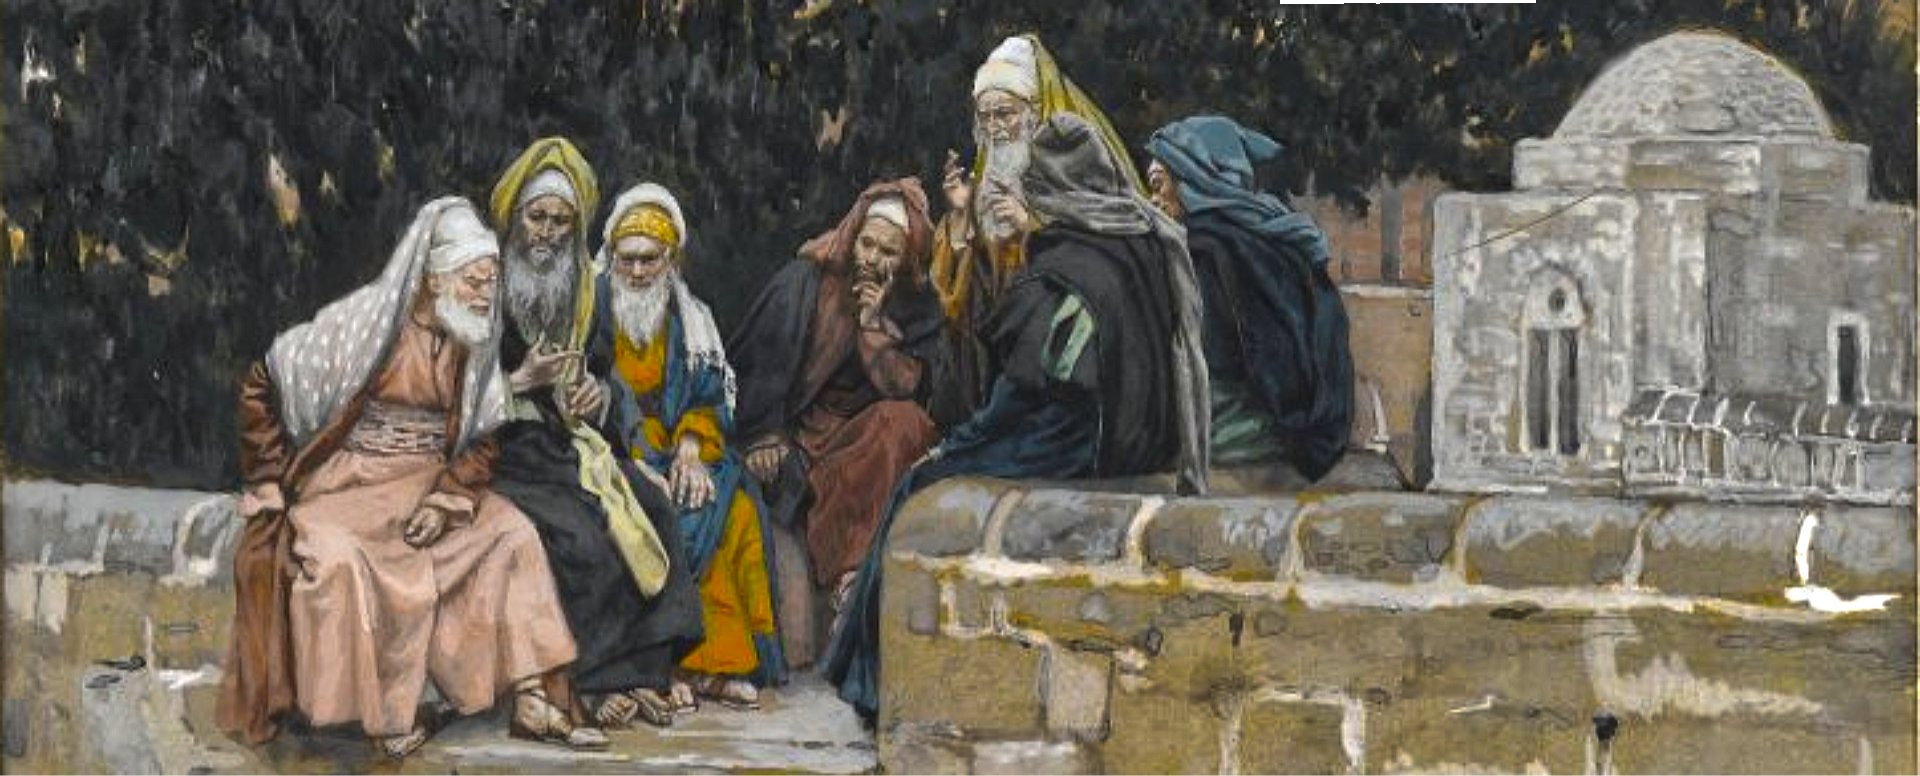 The Pharisees and the Herodians Conspire Against Jesus. Painter: James Tissot